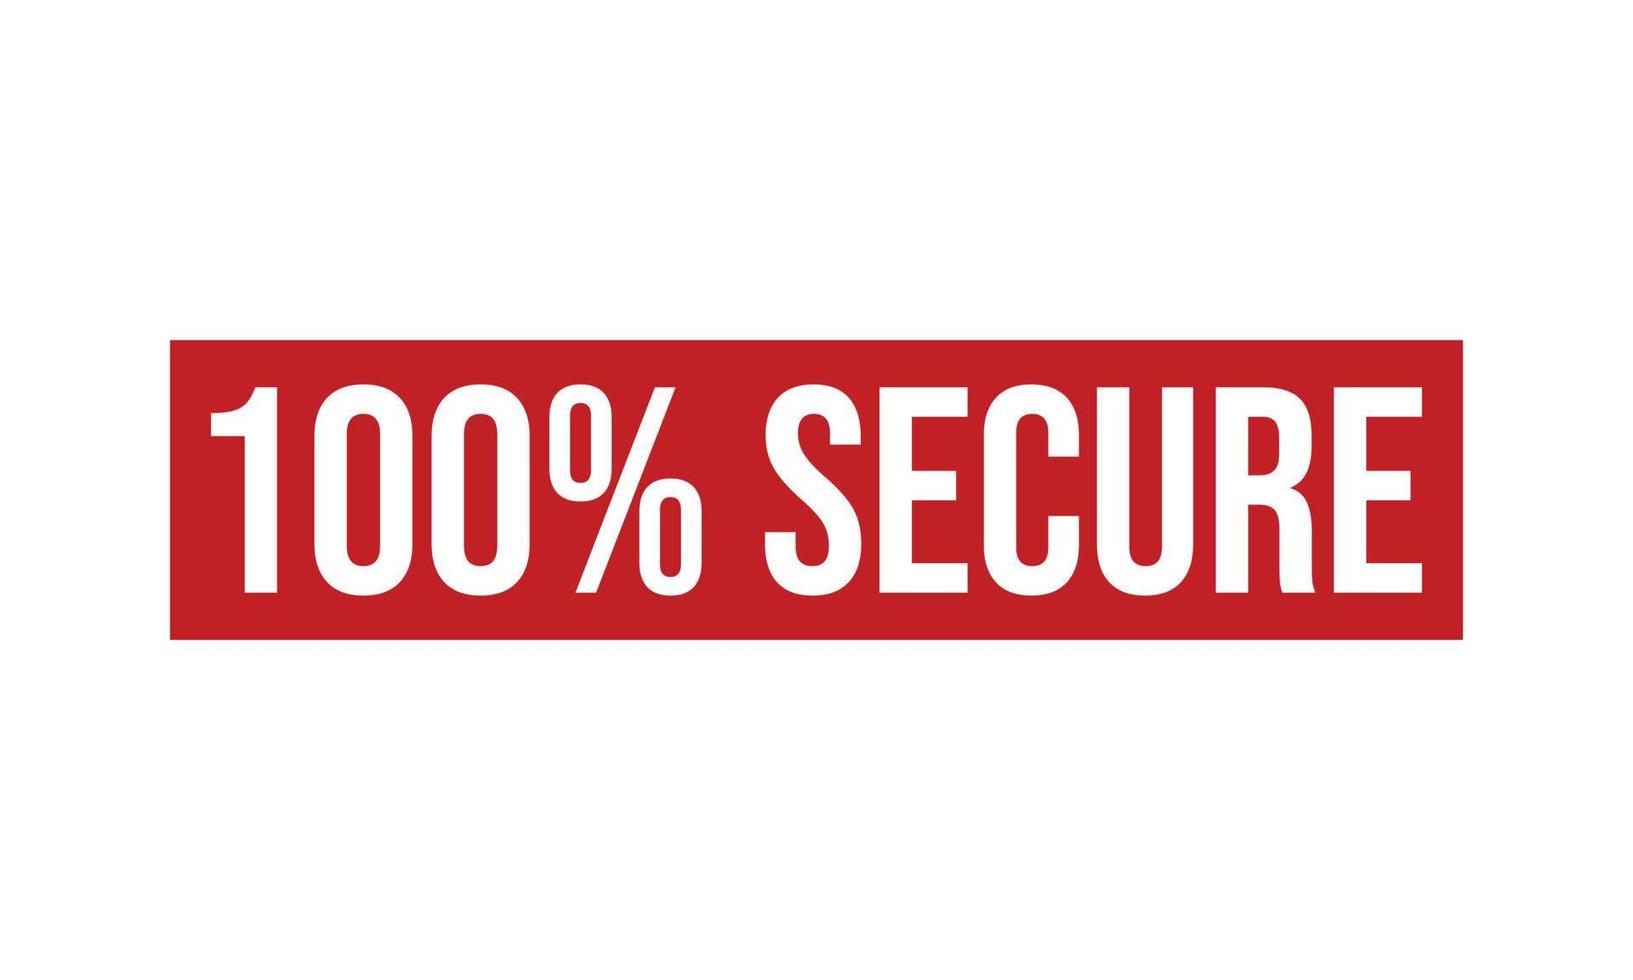 100 Percent Secure Rubber Stamp vector